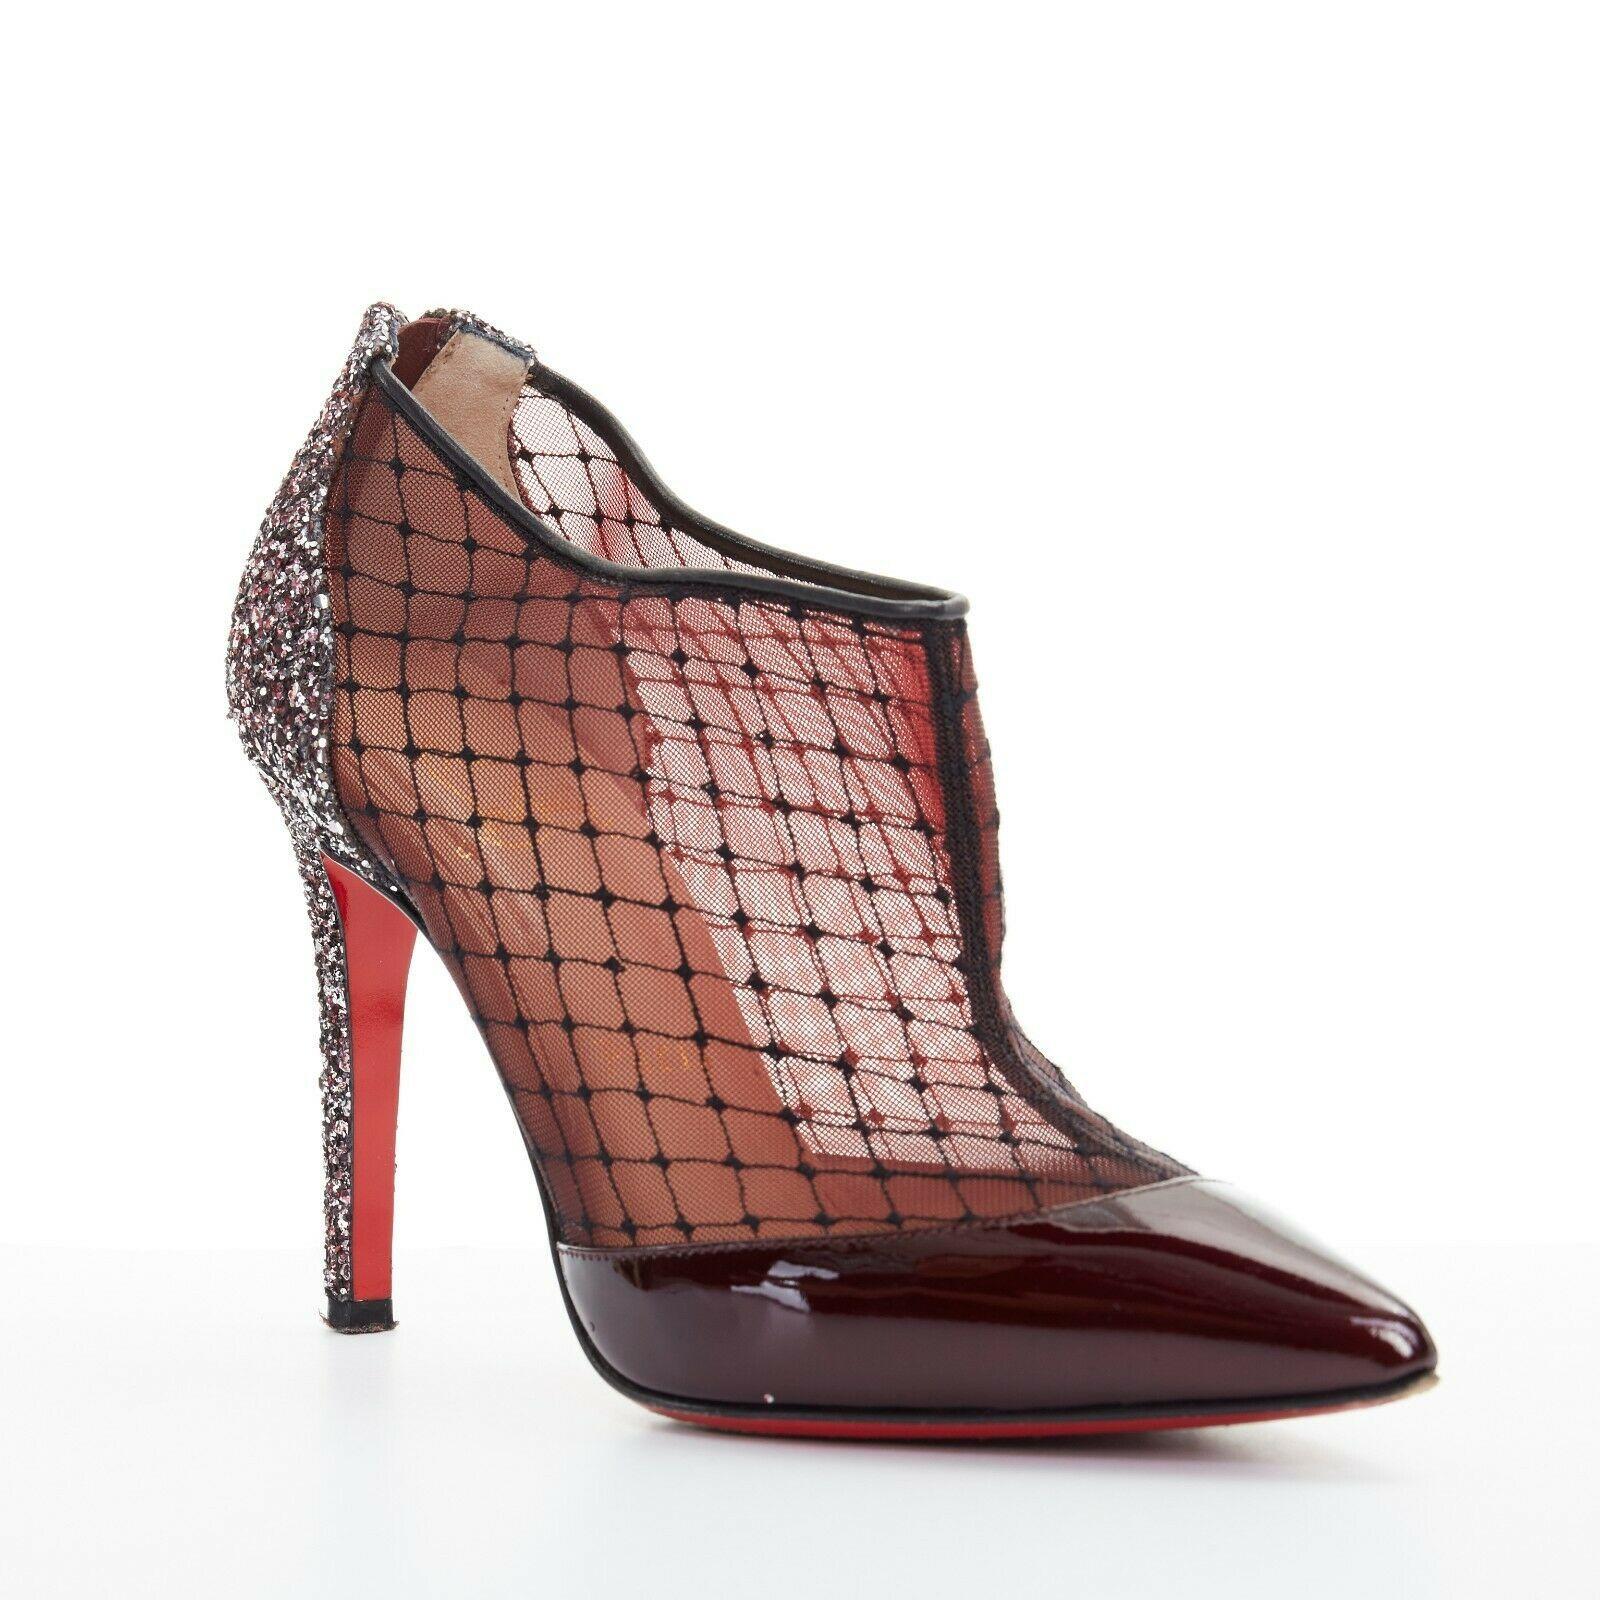 CHRISTIAN LOUBOUTIN Fillette 100 maroon patent mesh glitter heel bootie EU36
CHRISTIAN LOUBOUTIN
Fillette 100. Maroon dark red patent leather. 
Black fishnet embroidered mesh upper. Silver and burgundy glitter covered heel. 
Zip back closure. Tonal